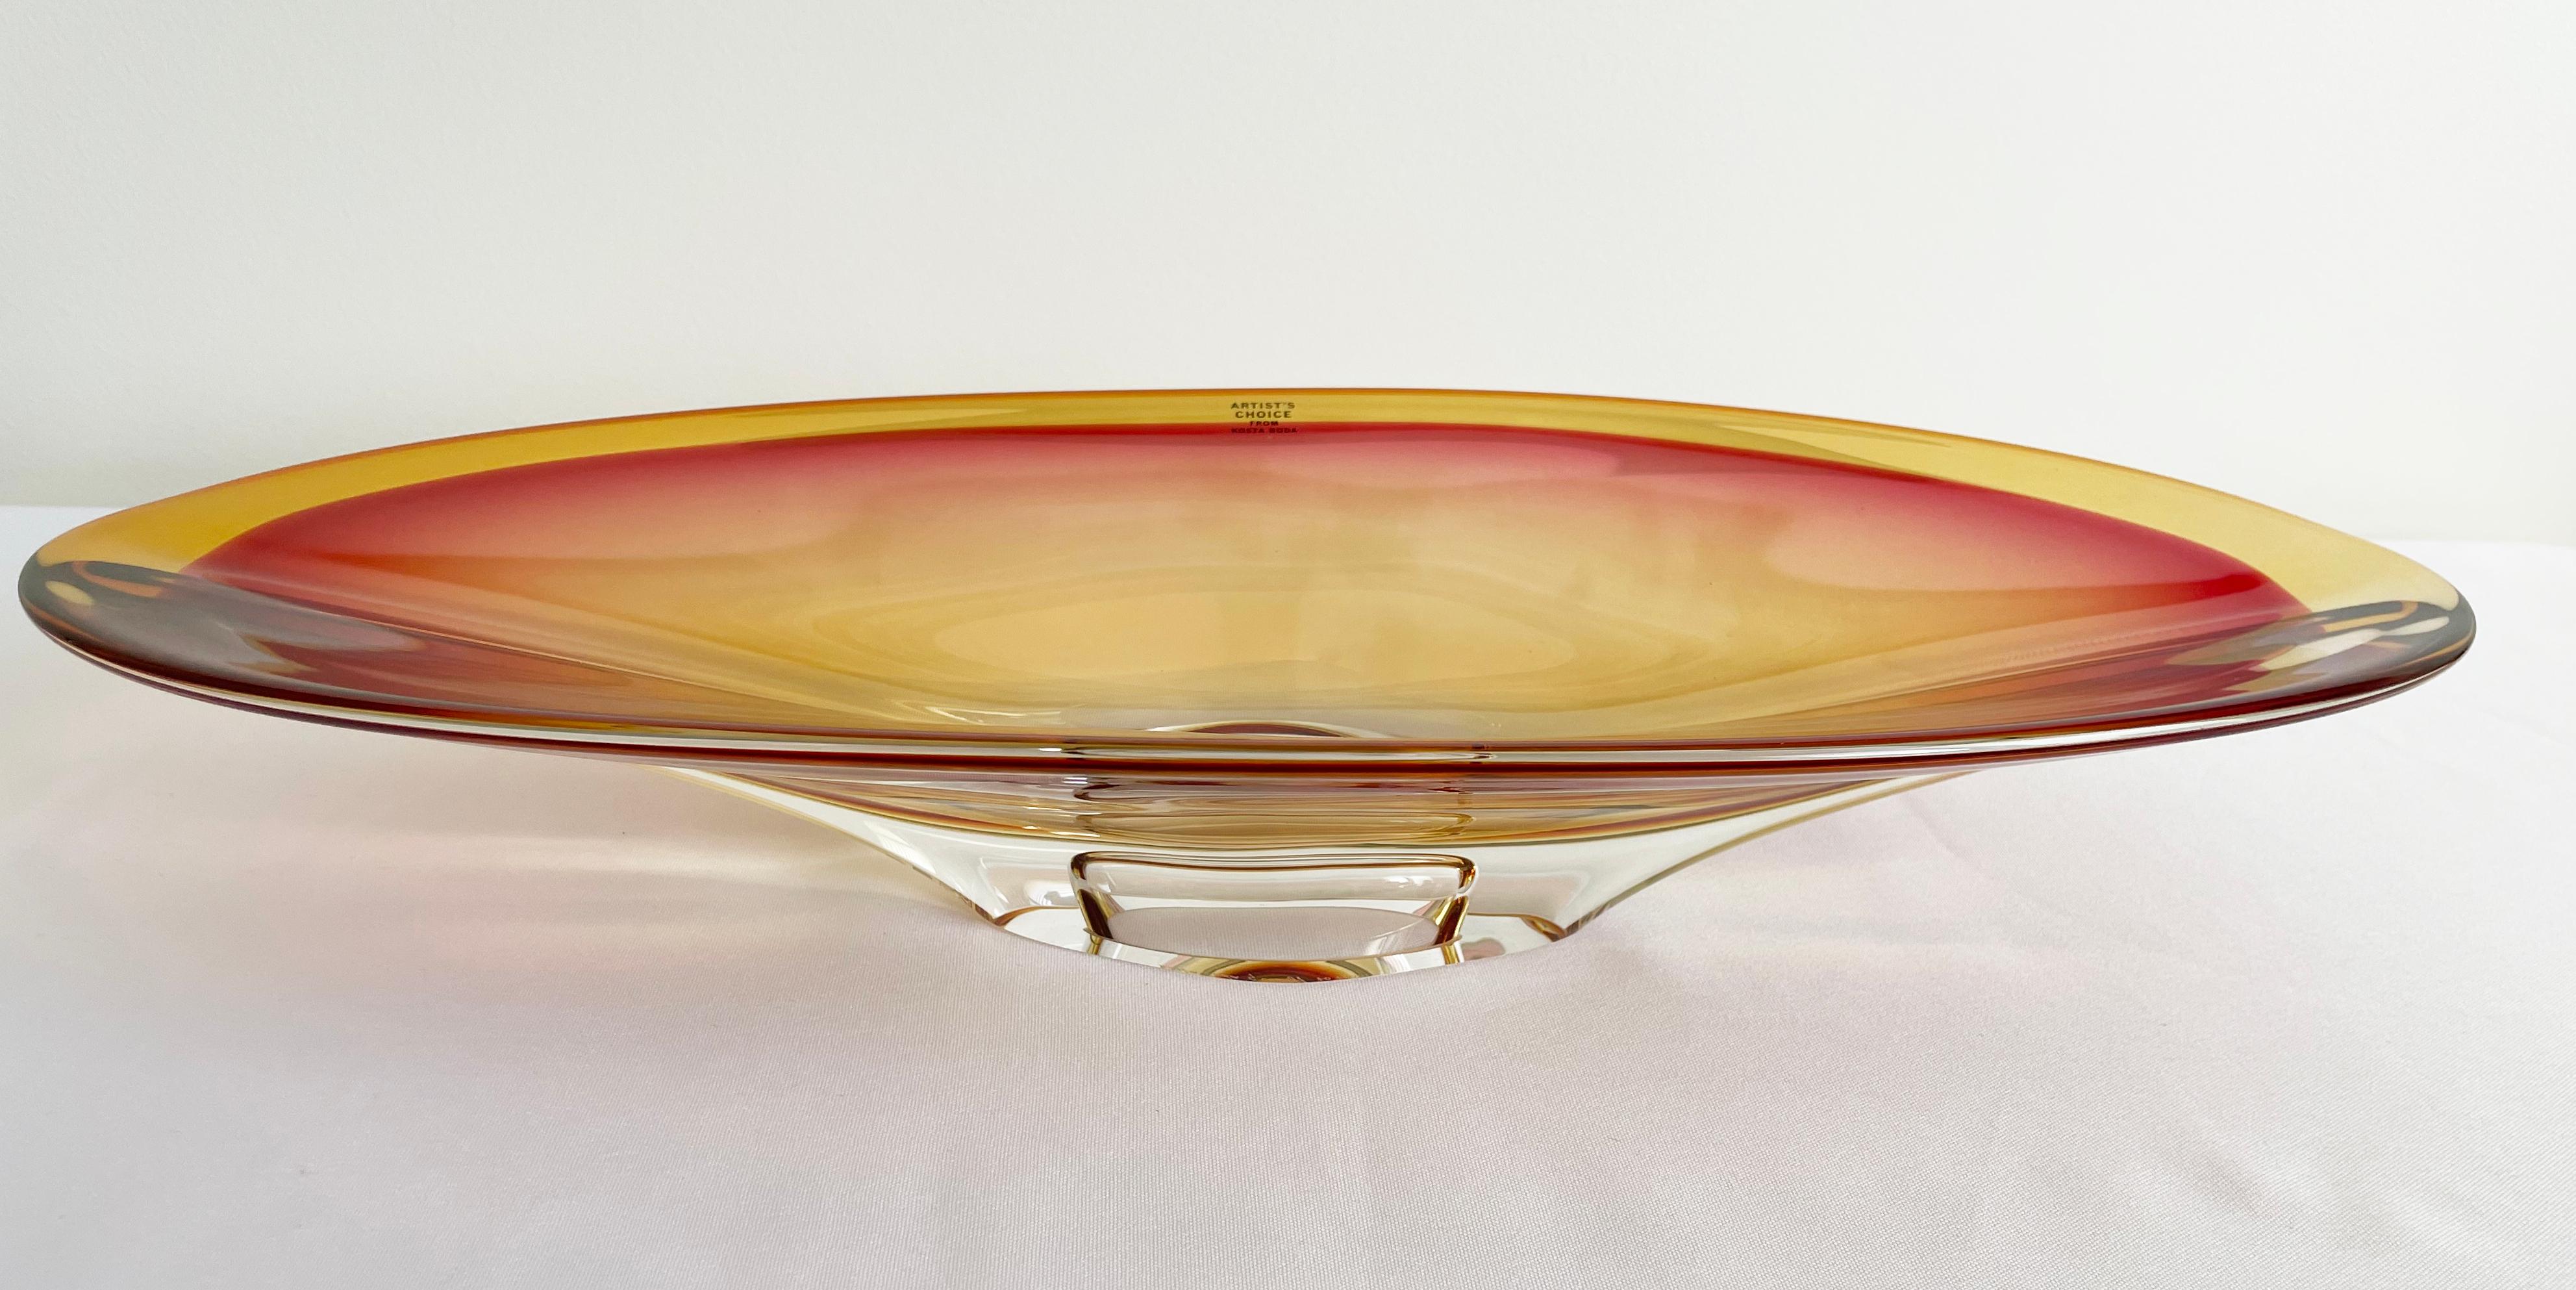 A large and impressive Kosta Boda Vision series bowl designed by the legendary glass artist Göran Wärff.  Soft pink/red hues.

Vision is handblown at Kosta Glassworks in Sweden and is part of the Kosta Boda Artist Collection.

Perfect condition - no